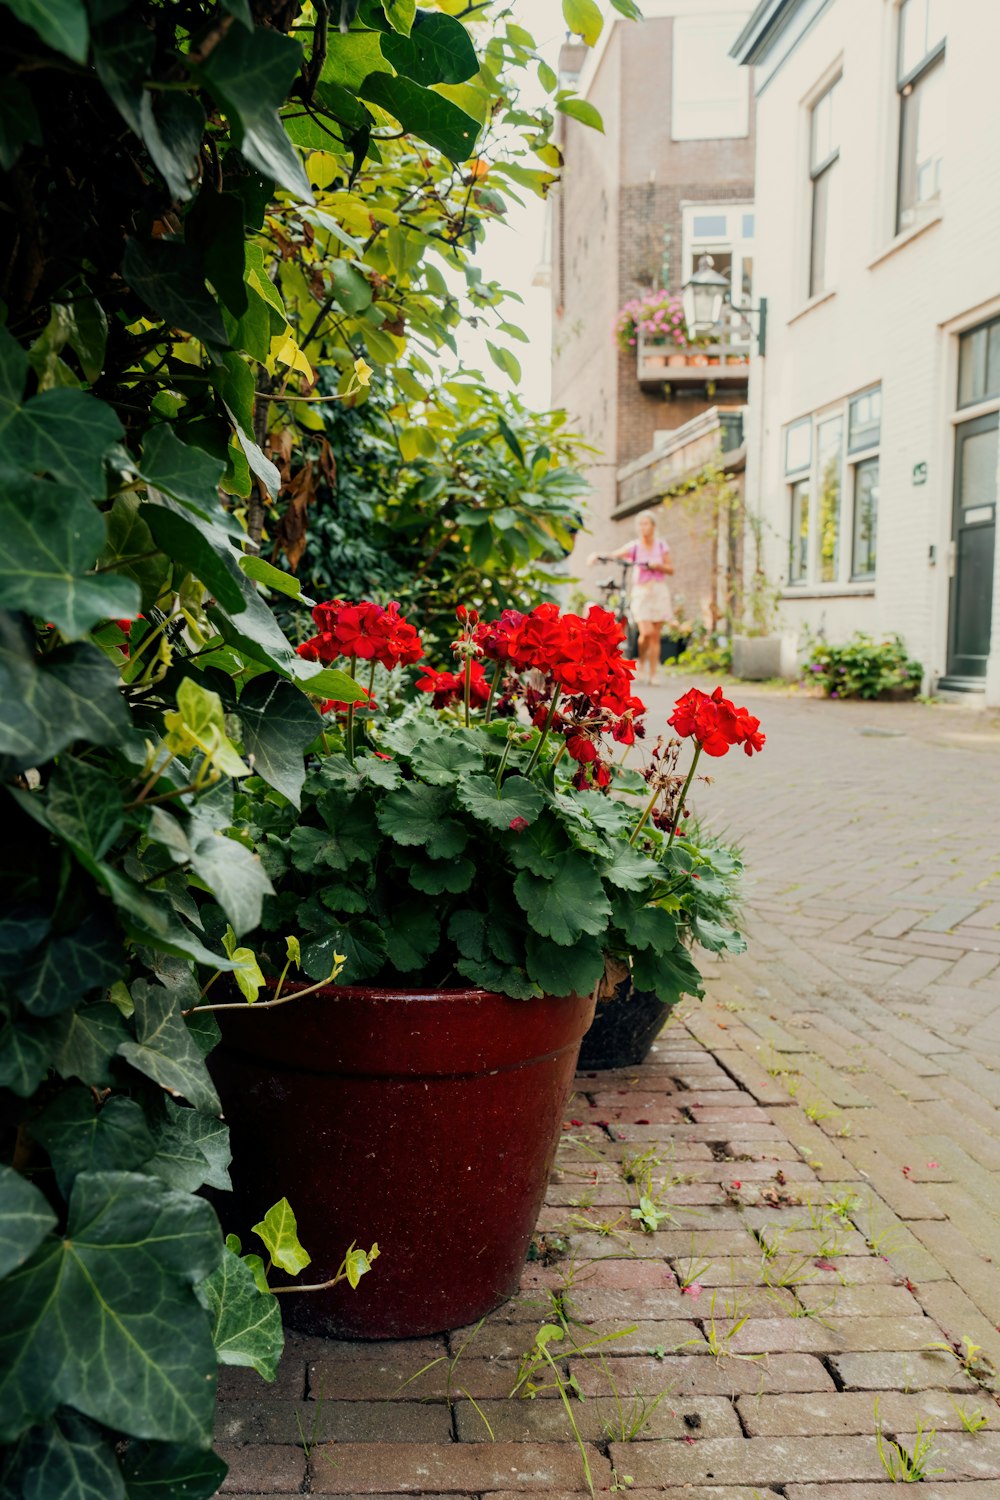 a brick sidewalk with potted plants on it